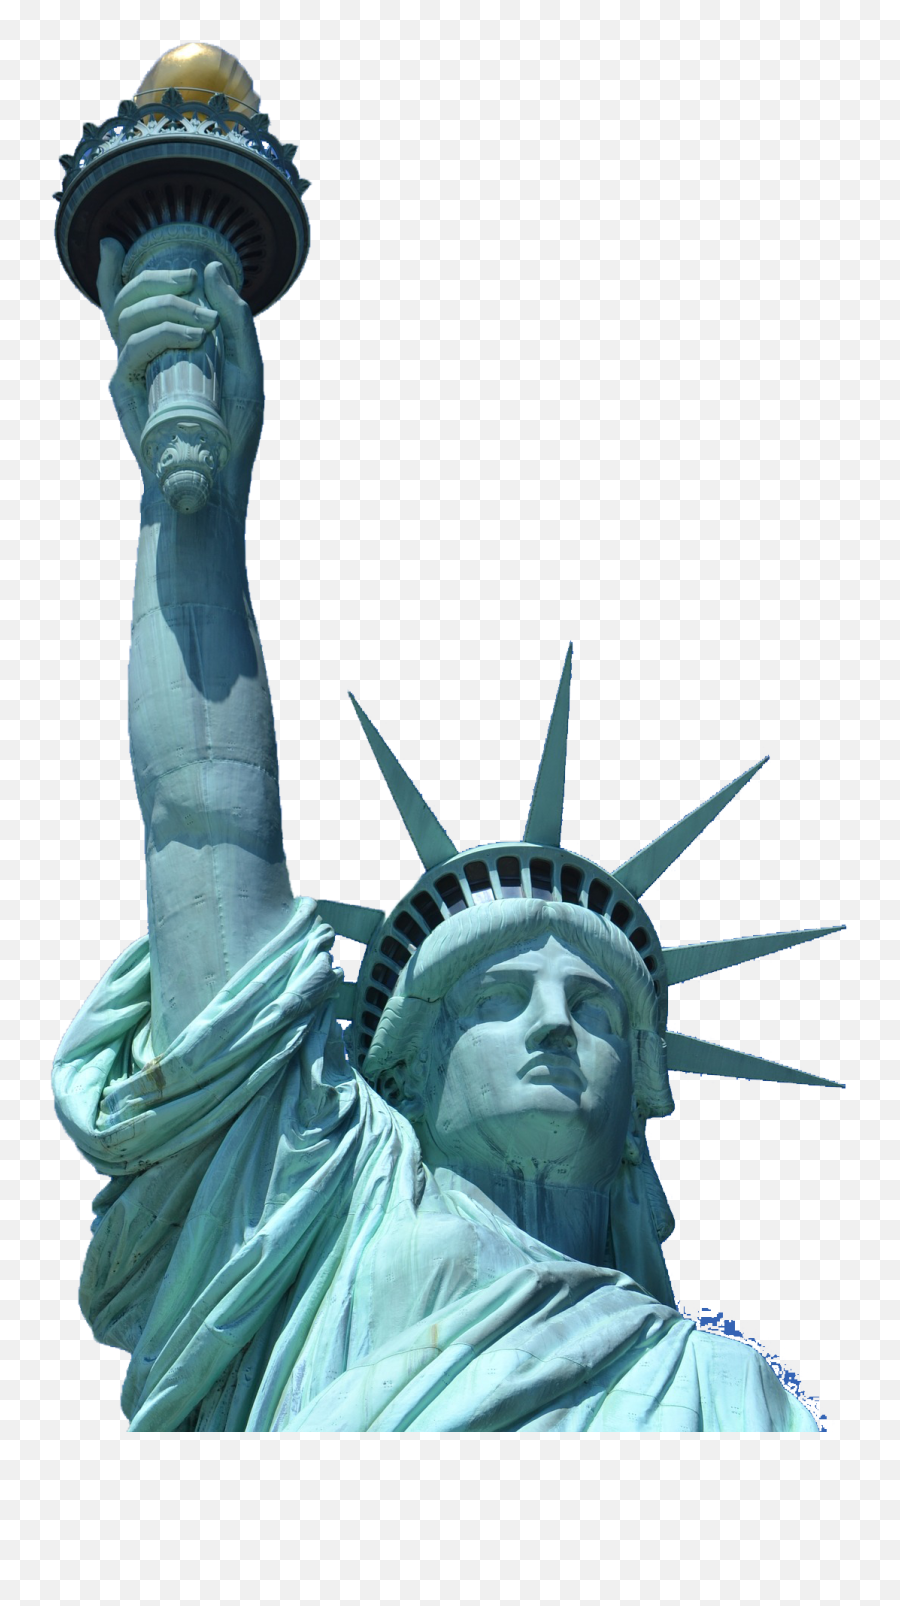 Learn About The Immigrant Legal Advocacy Project Postponed - Statue Of Liberty Emoji,Statue Emoji